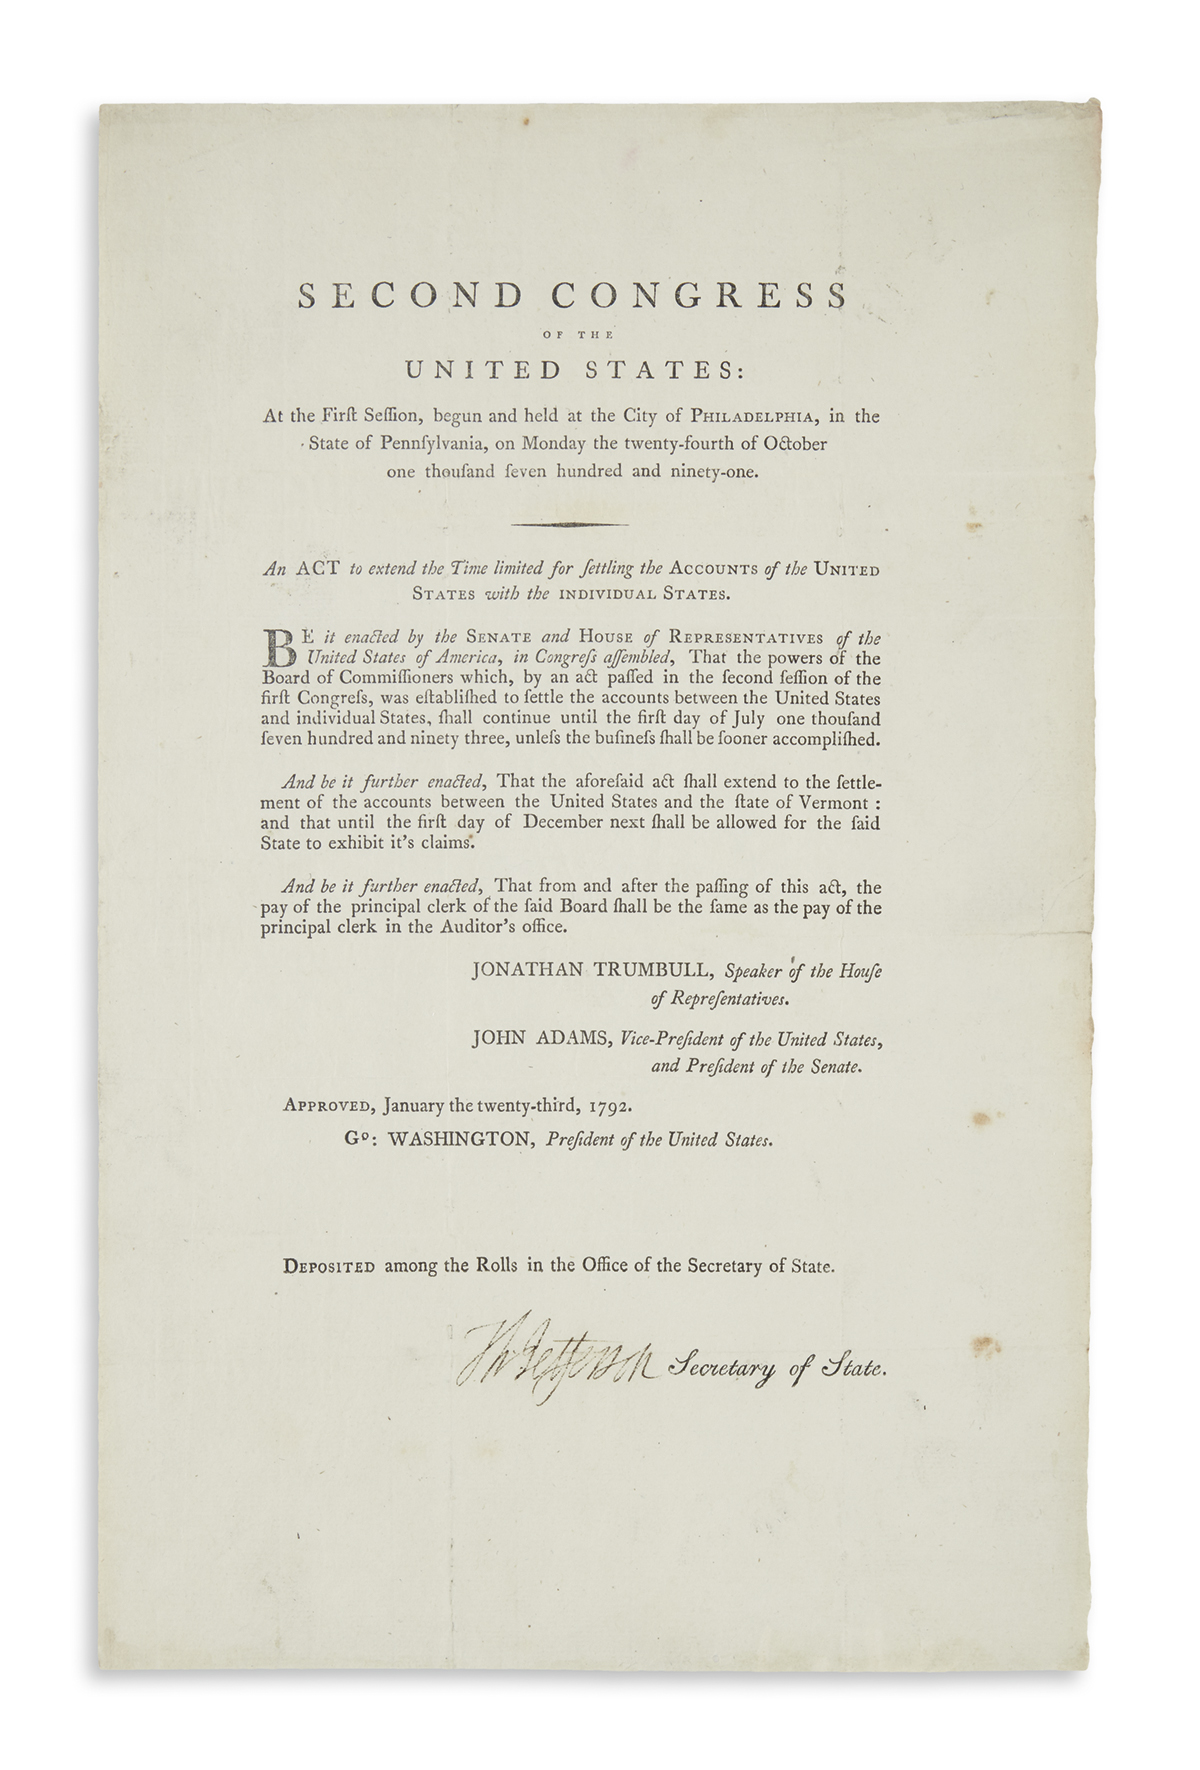 JEFFERSON, THOMAS. Printed Document Signed, Th:Jefferson, as Secretary of State, an act of the Second Congress: